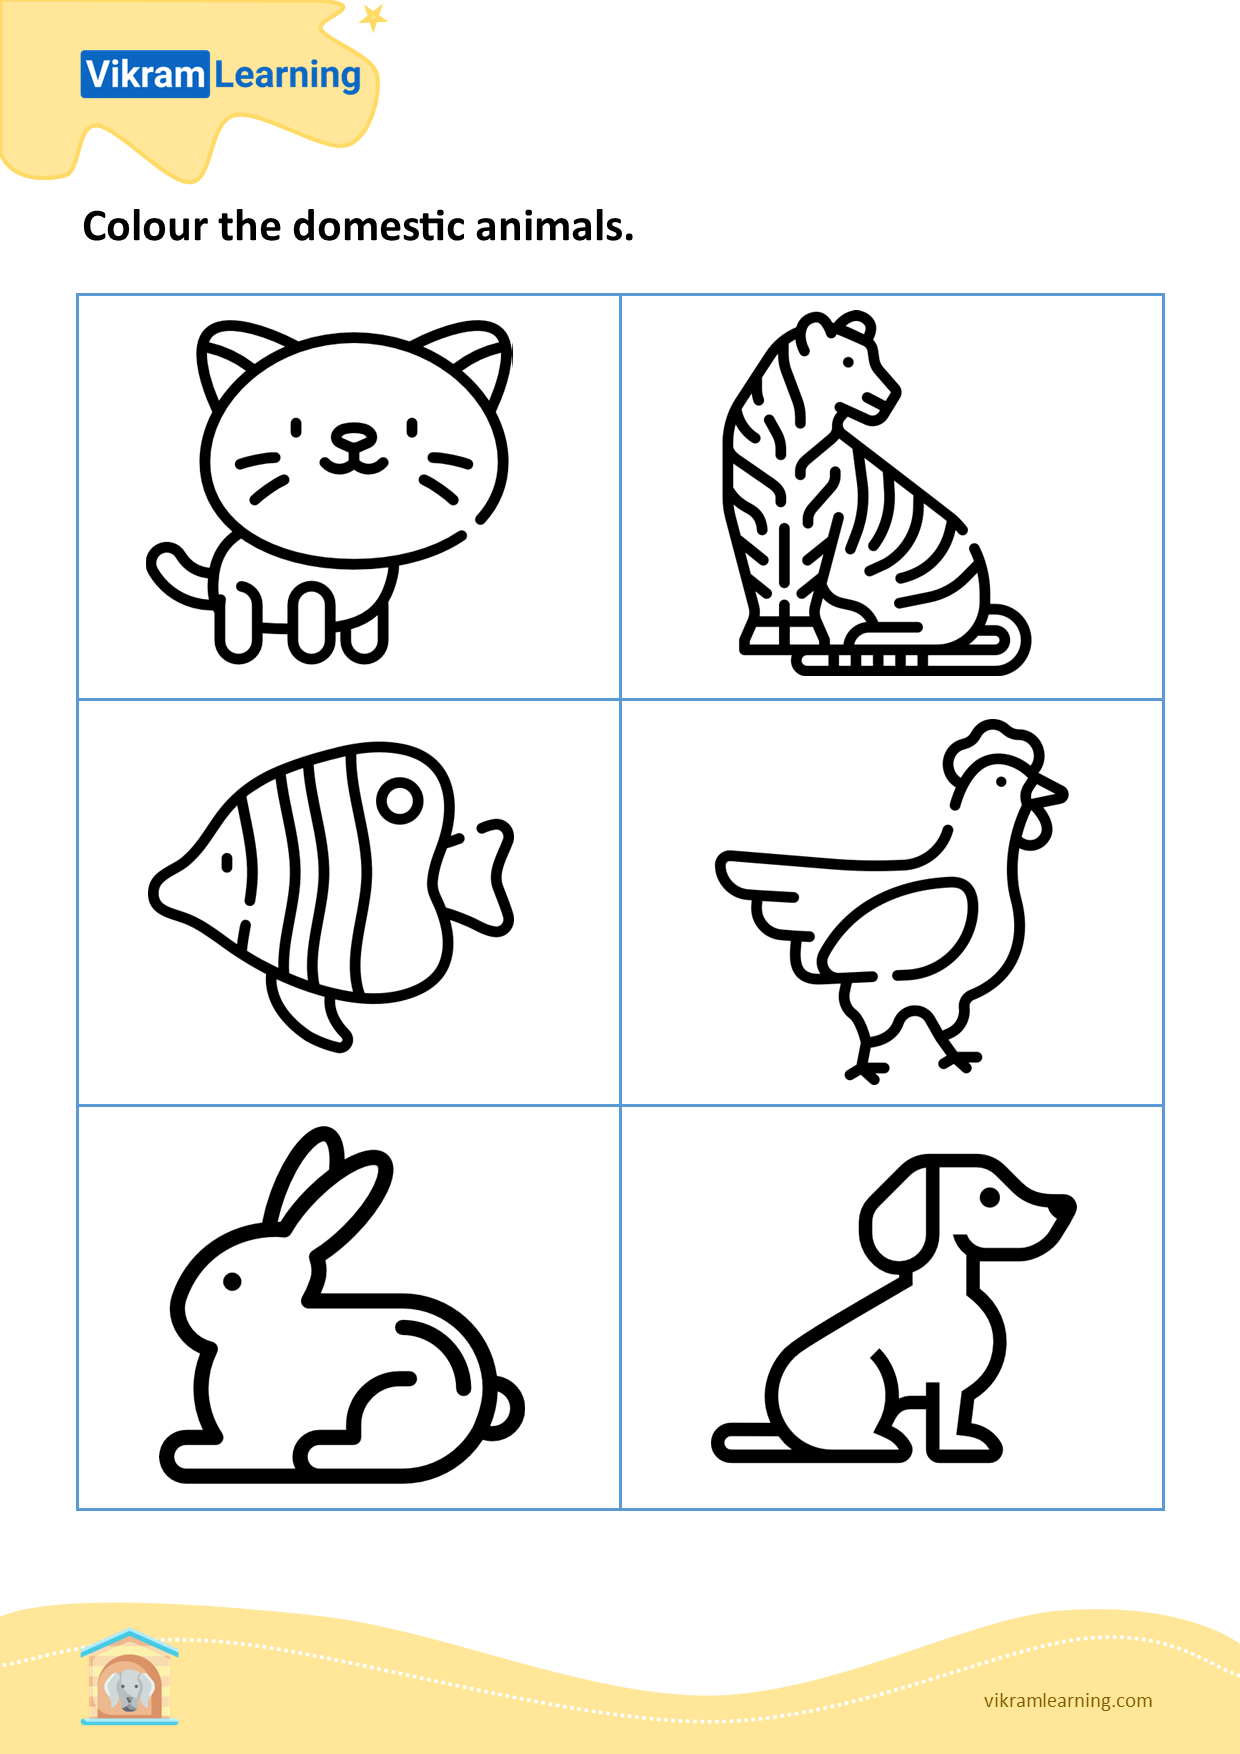 Download colour the domestic animals - 1 worksheets 